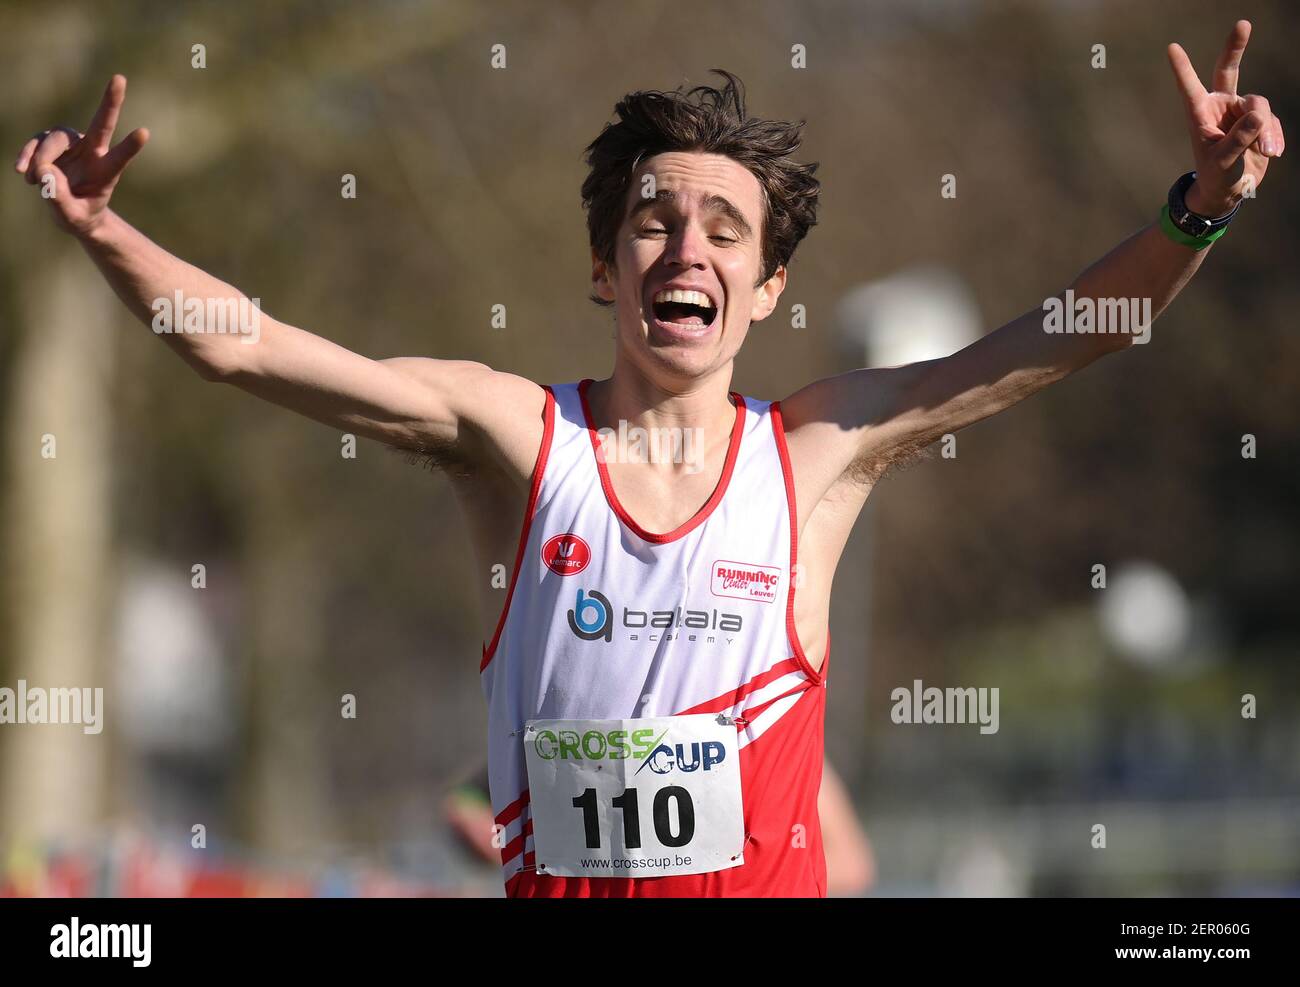 Belgian John Heymans celebrates as he crosses the finish line to win the men's race at the first stage (out of three) of the 'CrossCup' cross country Stock Photo